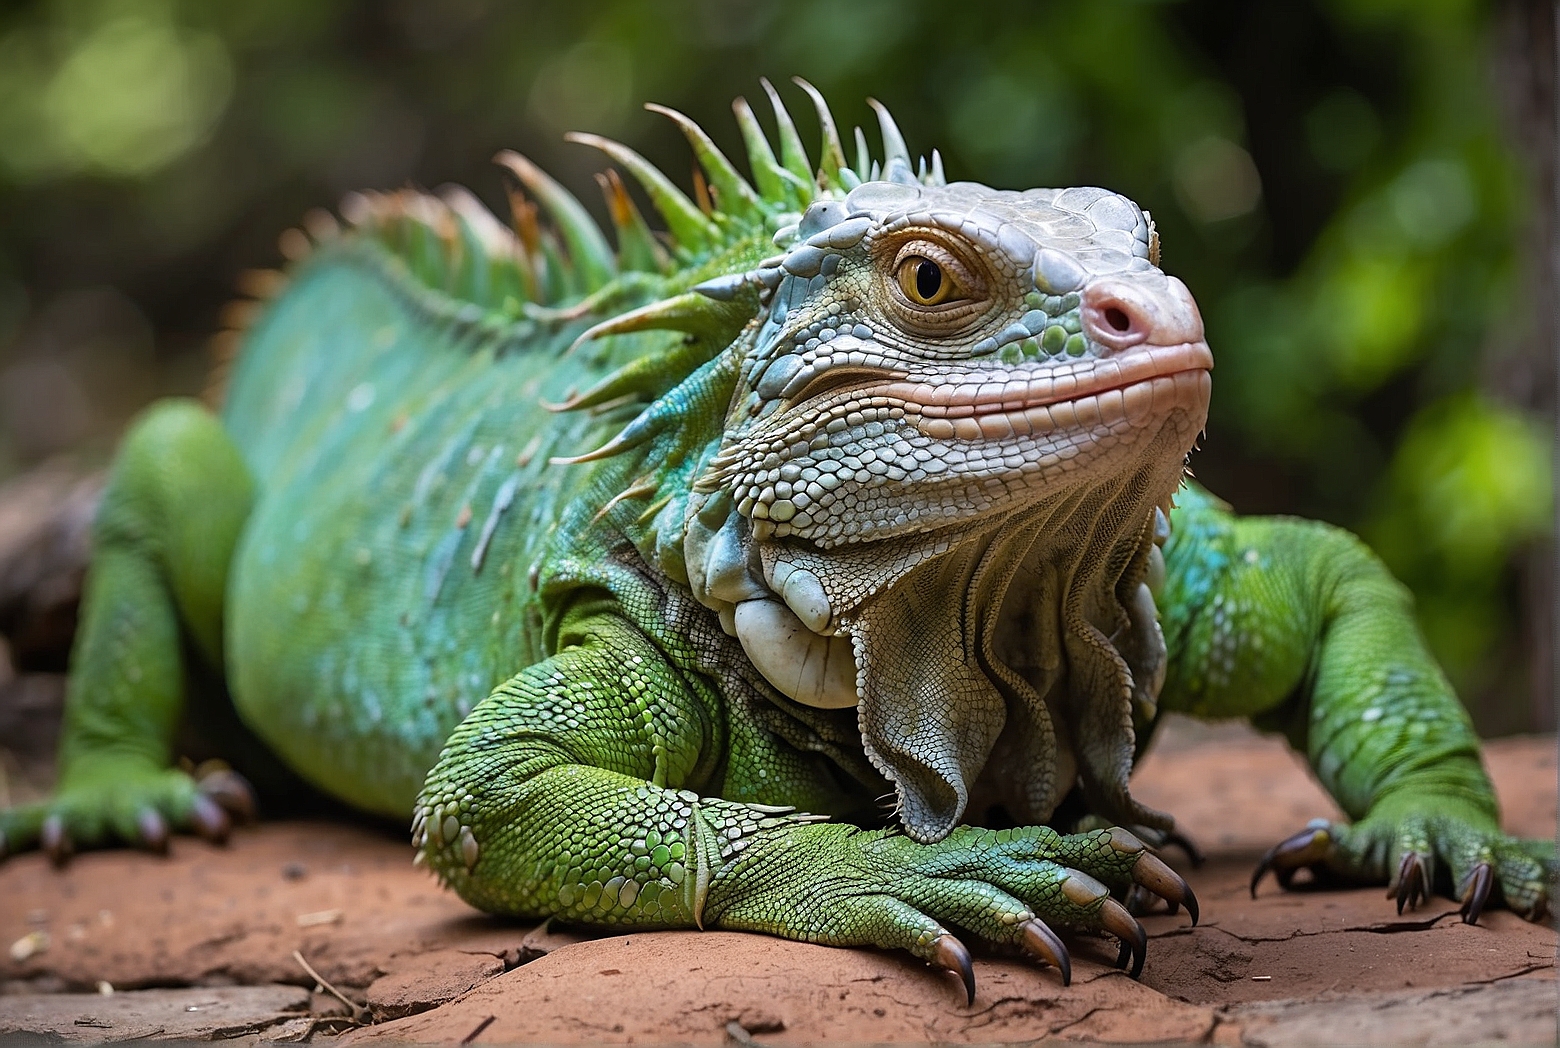 Differences between Male and Female Green Iguanas